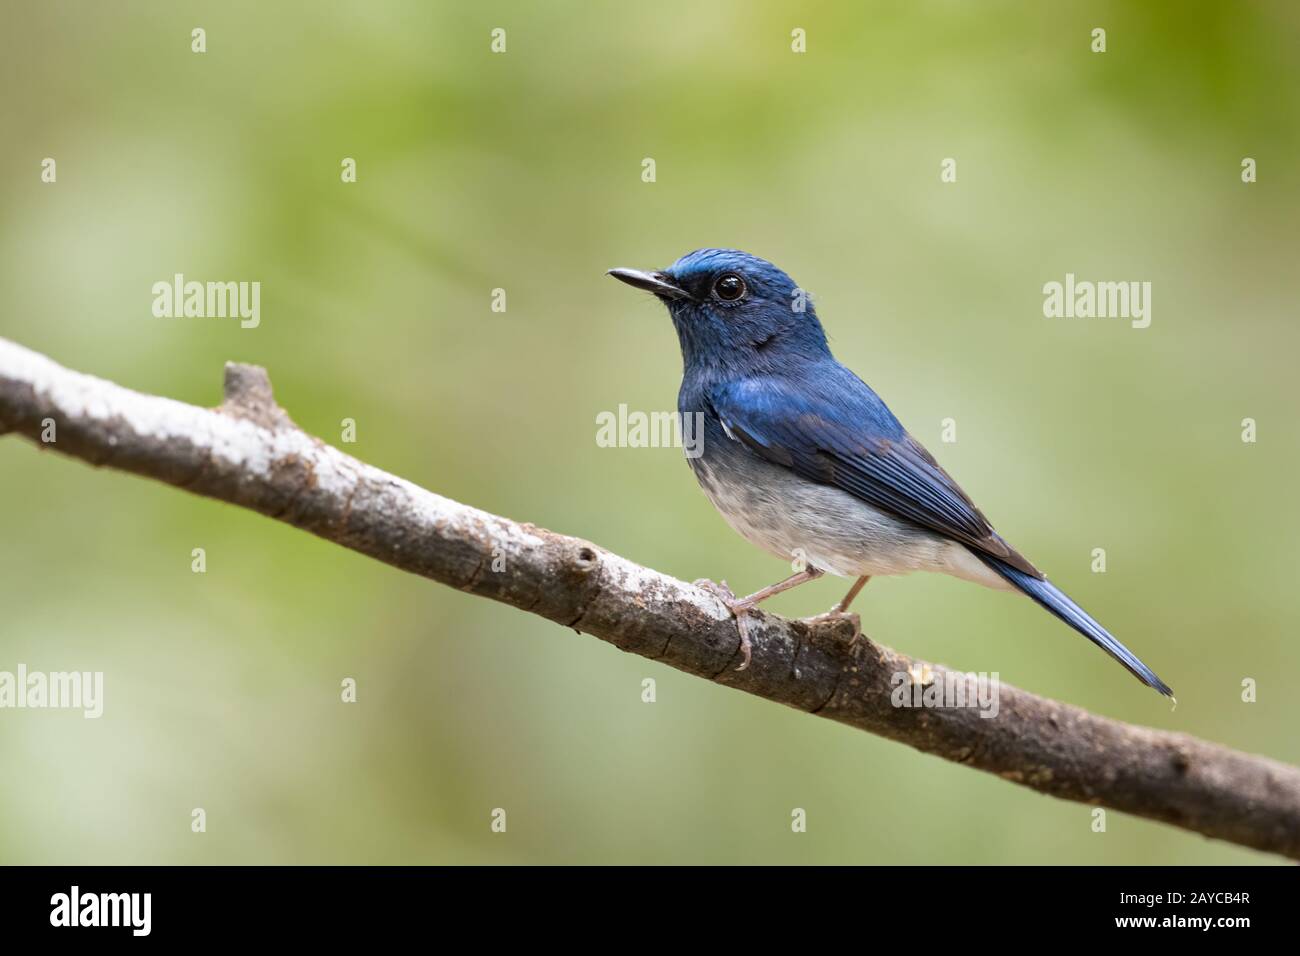 The Hainan blue flycatcher (Cyornis hainanus) is a species of bird in the family Muscicapidae. Stock Photo